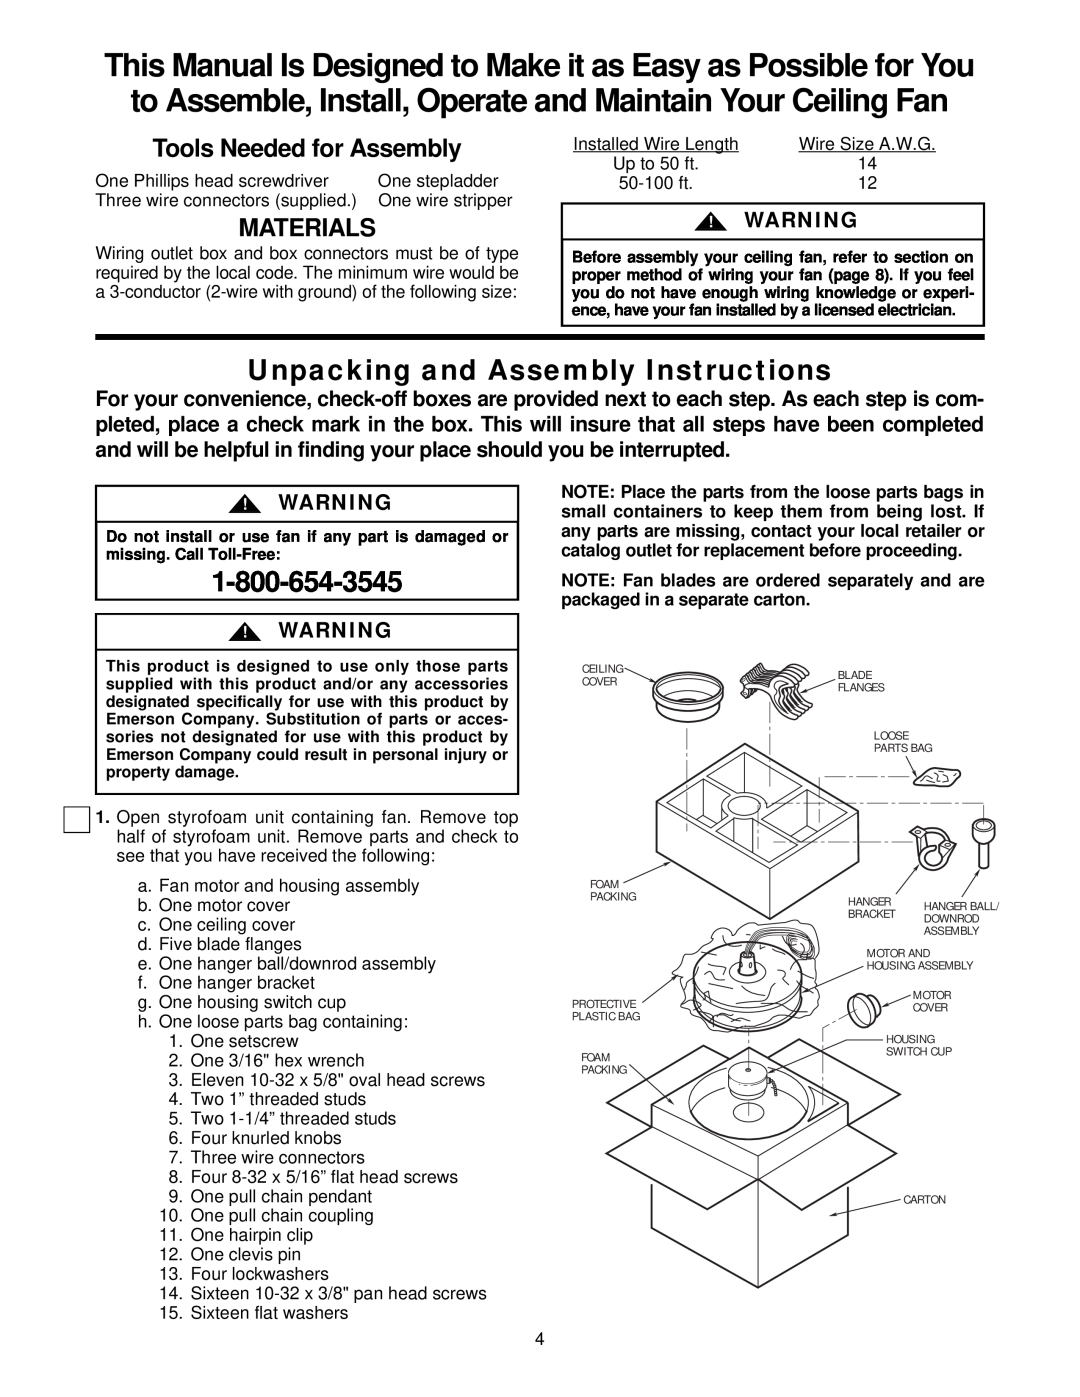 Emerson CF3900BS01, CF3900WPB01, CF3900WW01 Unpacking and Assembly Instructions, Tools Needed for Assembly, Materials 